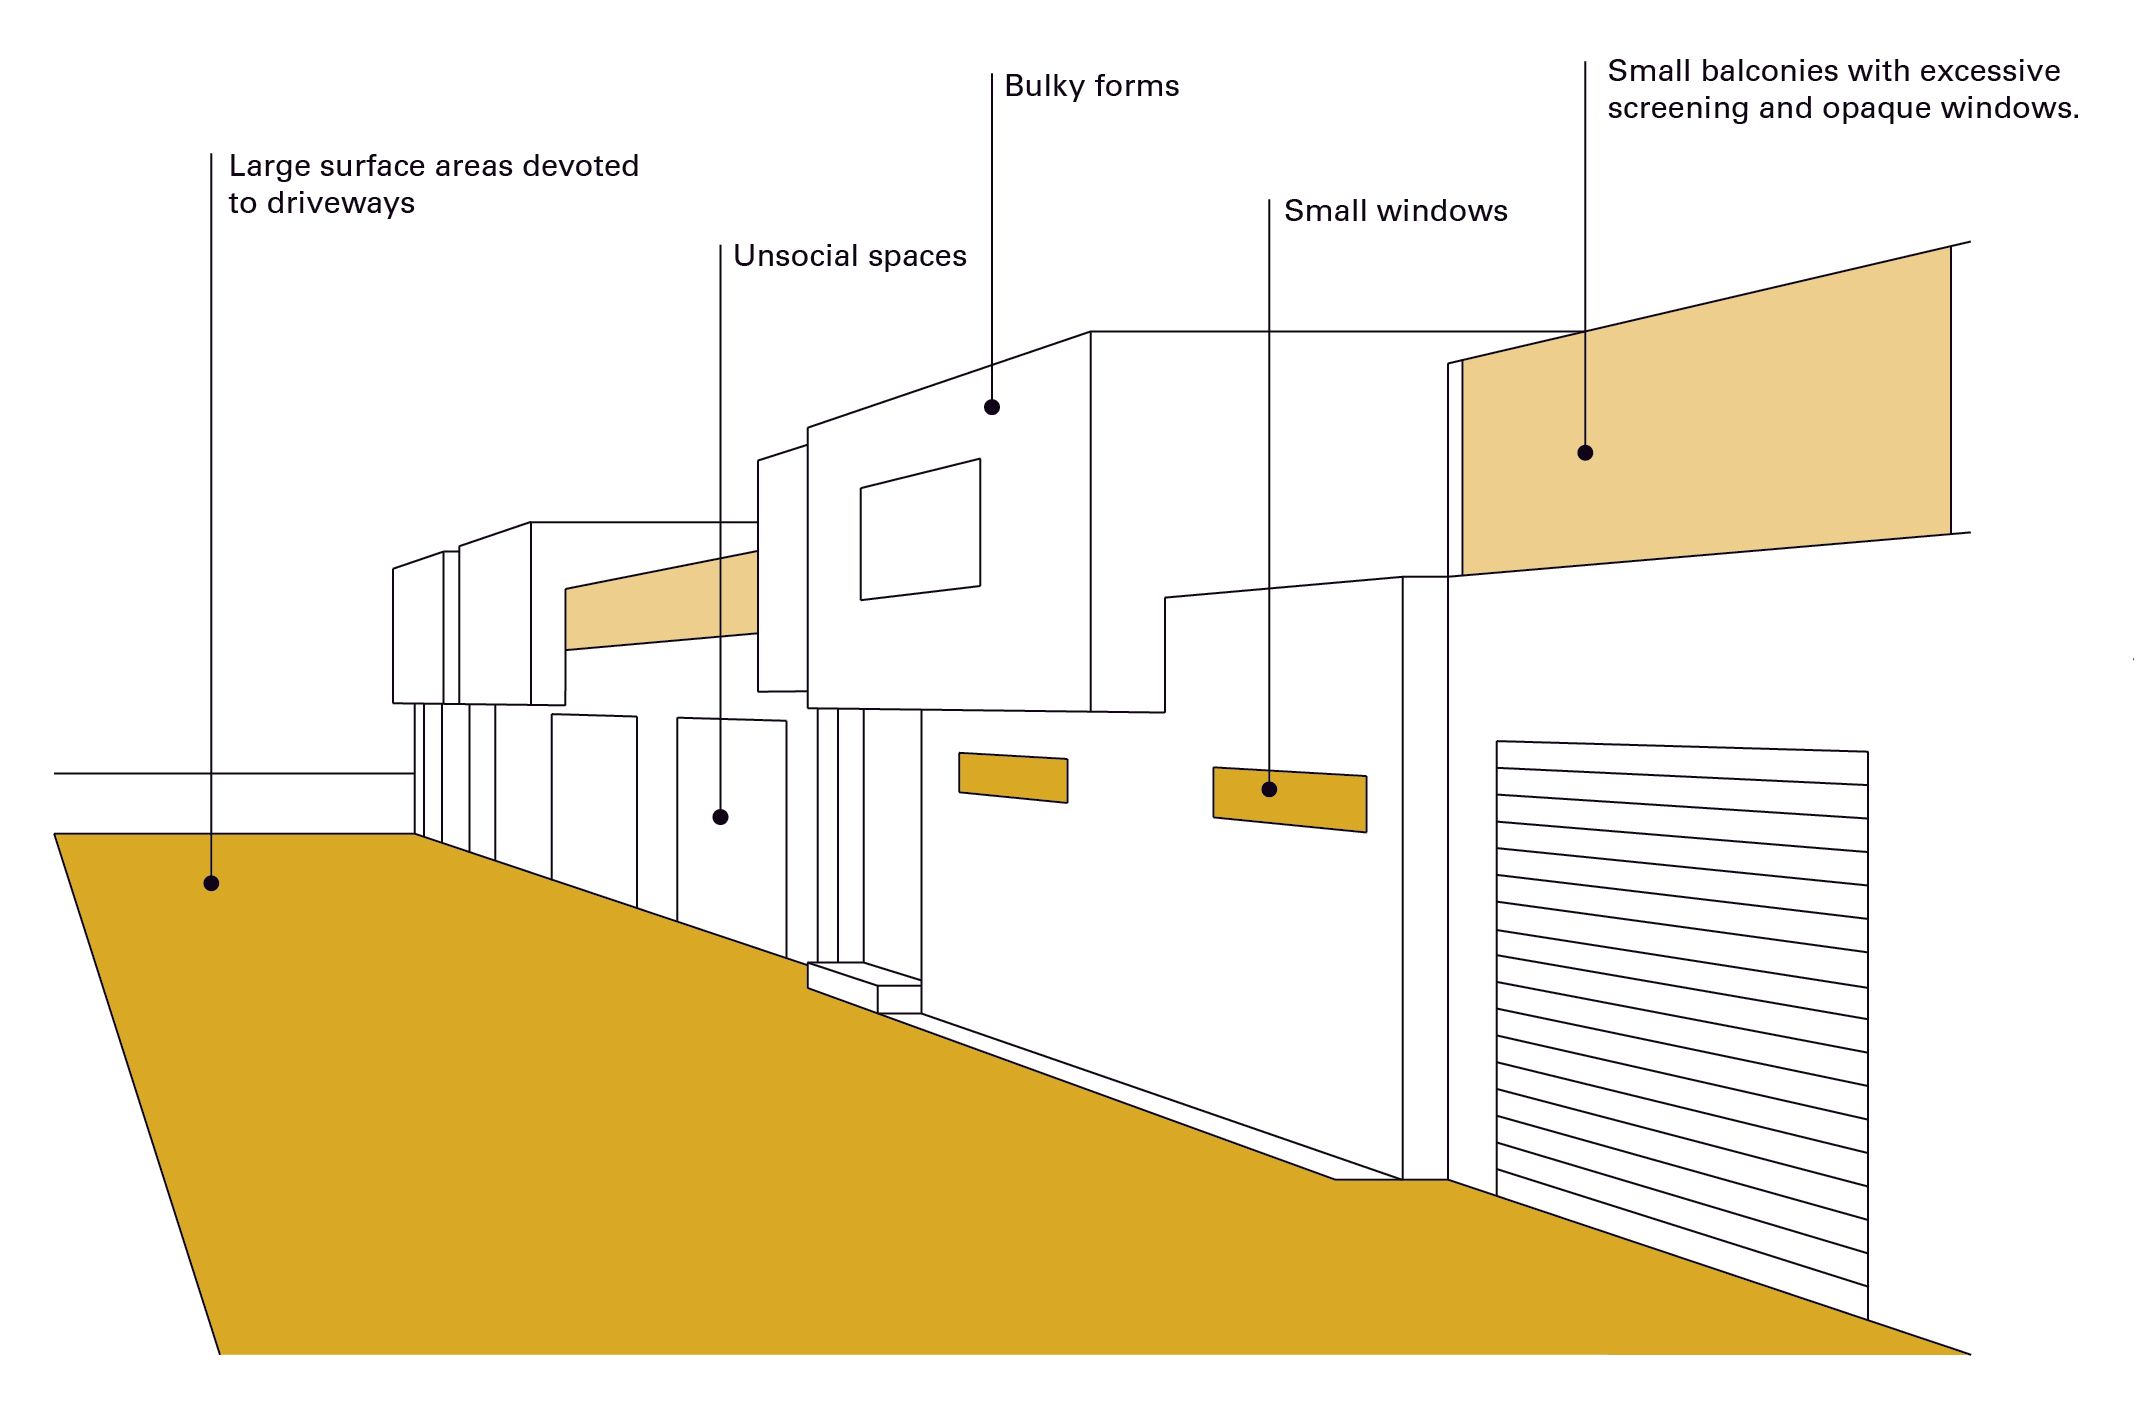 Illustration of poor subdivision outcomes: Bulky 'Ziggurat' forms, small outdoor unusable areas, small windows, small balconies with excessive screening and opaque windows, large surface areas devoted to driveway, enclosed public walkways, poor street frontage design and unsocial spaces.